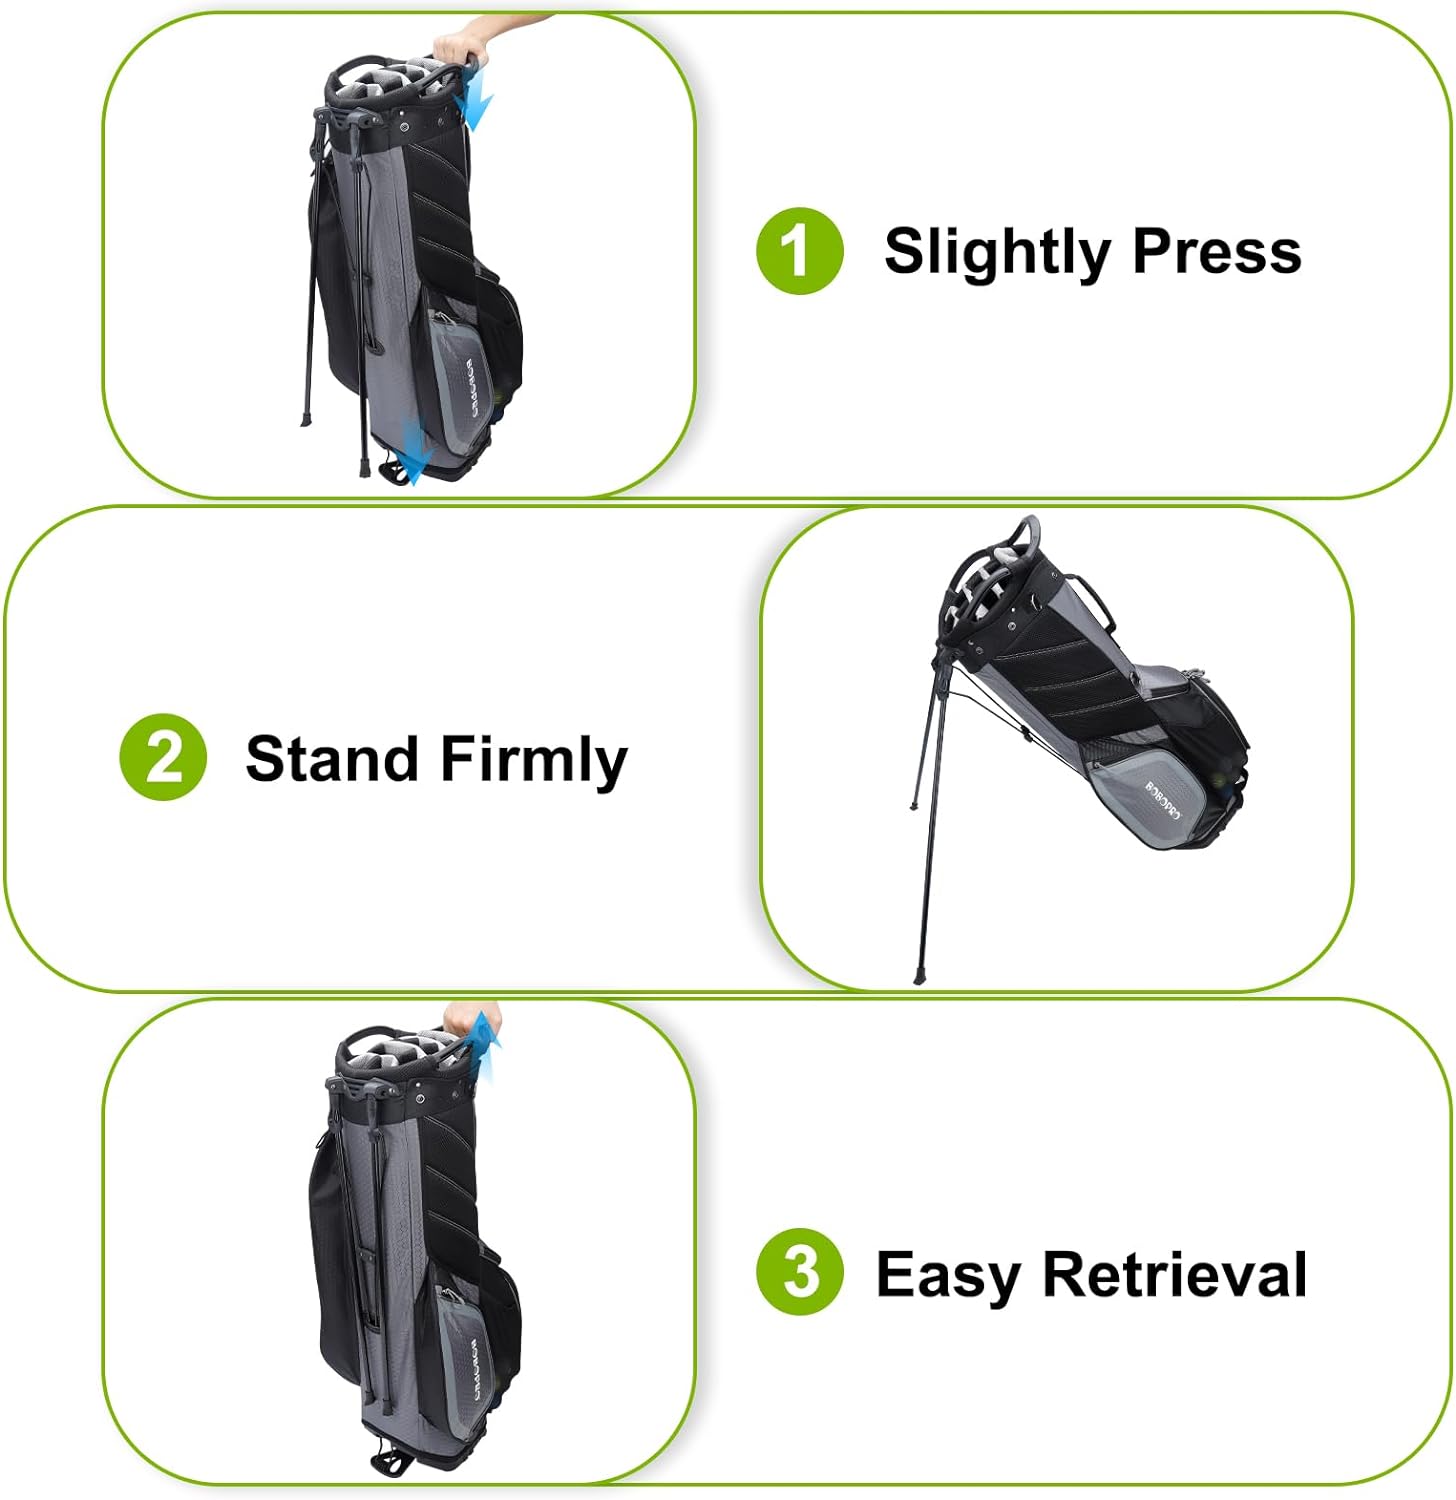 BOBOPRO Golf Stand Bag, Golf Bags with Stand, 14 Way Top Divider Golf Club Bag with 7 Pockets, Cooler Pouch and Rain Hood, Dual Shoulder Straps, Lightweight and Waterproof for Men Women